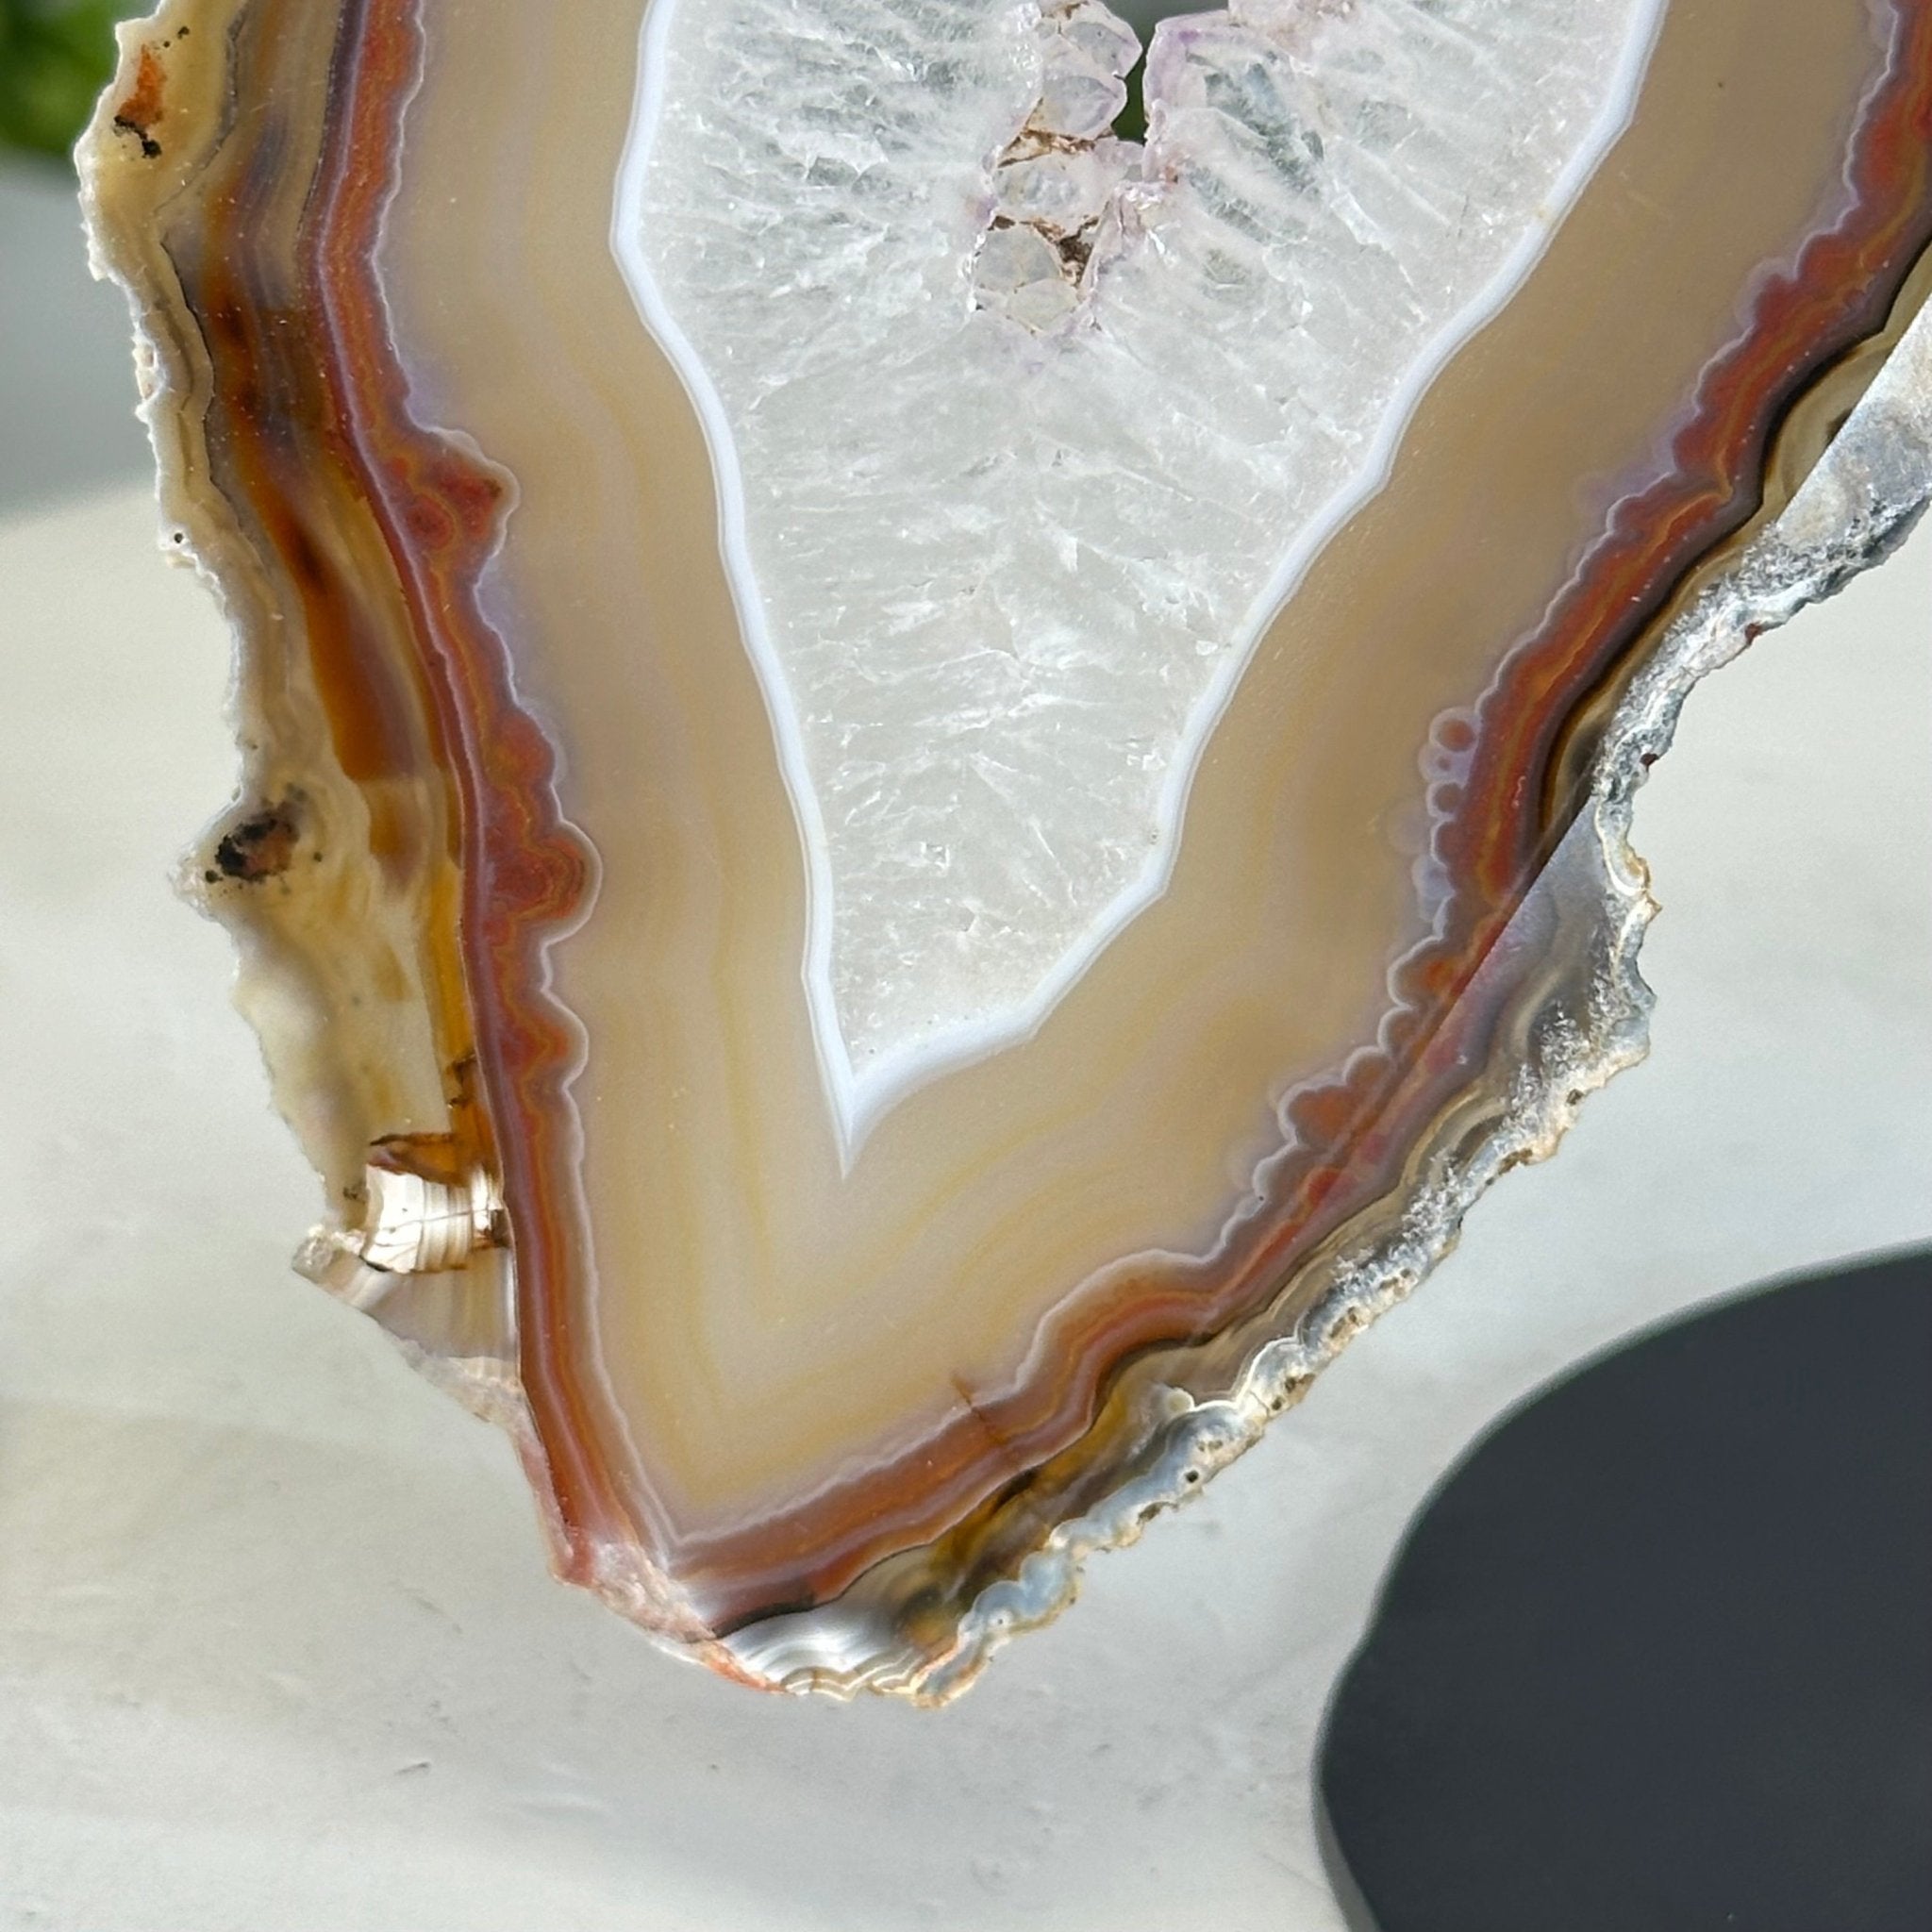 Natural Brazilian Agate "Butterfly Wings", 7.9" Tall #5050NA-138 - Brazil GemsBrazil GemsNatural Brazilian Agate "Butterfly Wings", 7.9" Tall #5050NA-138Agate Butterfly Wings5050NA-138